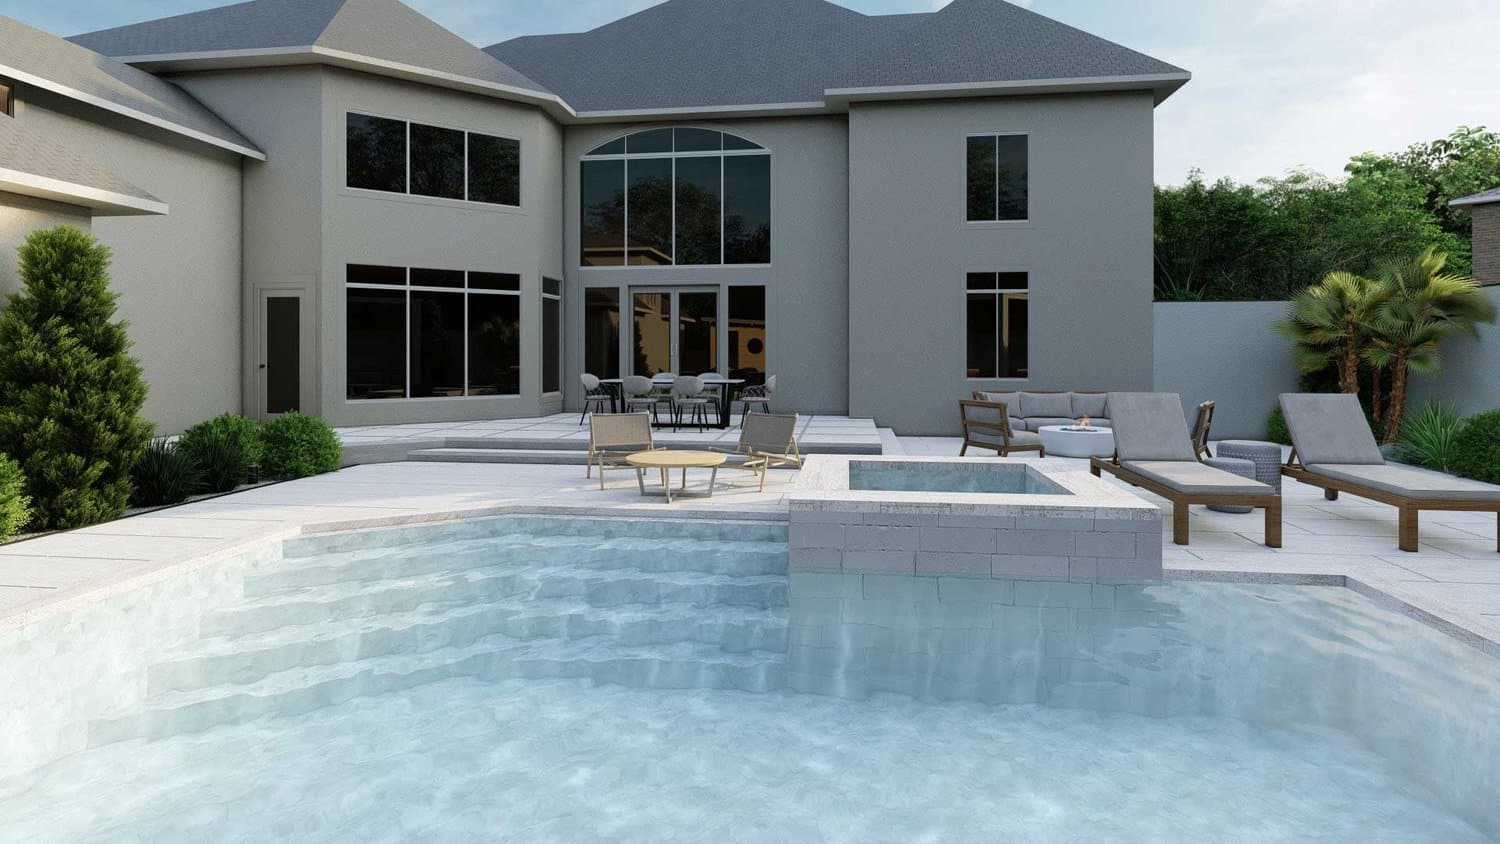 Charlotte front yard pool with concrete deck, and lounging and dining areas